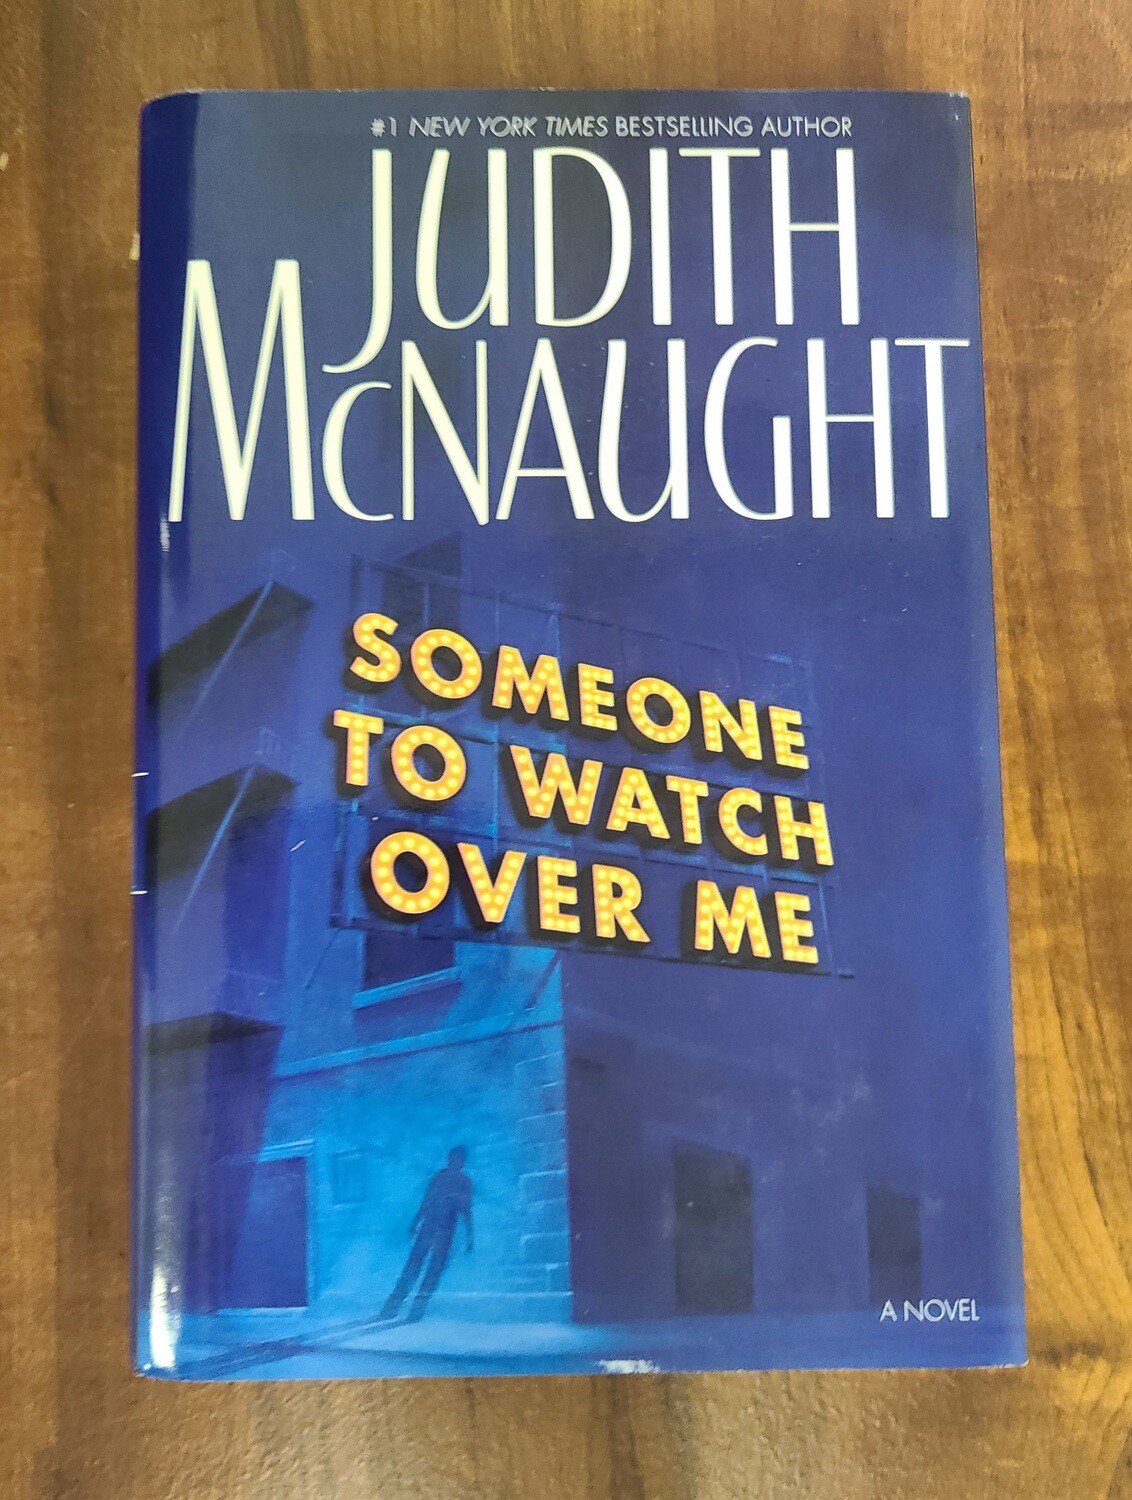 Someone To Watch Over Me by Judith McNaught